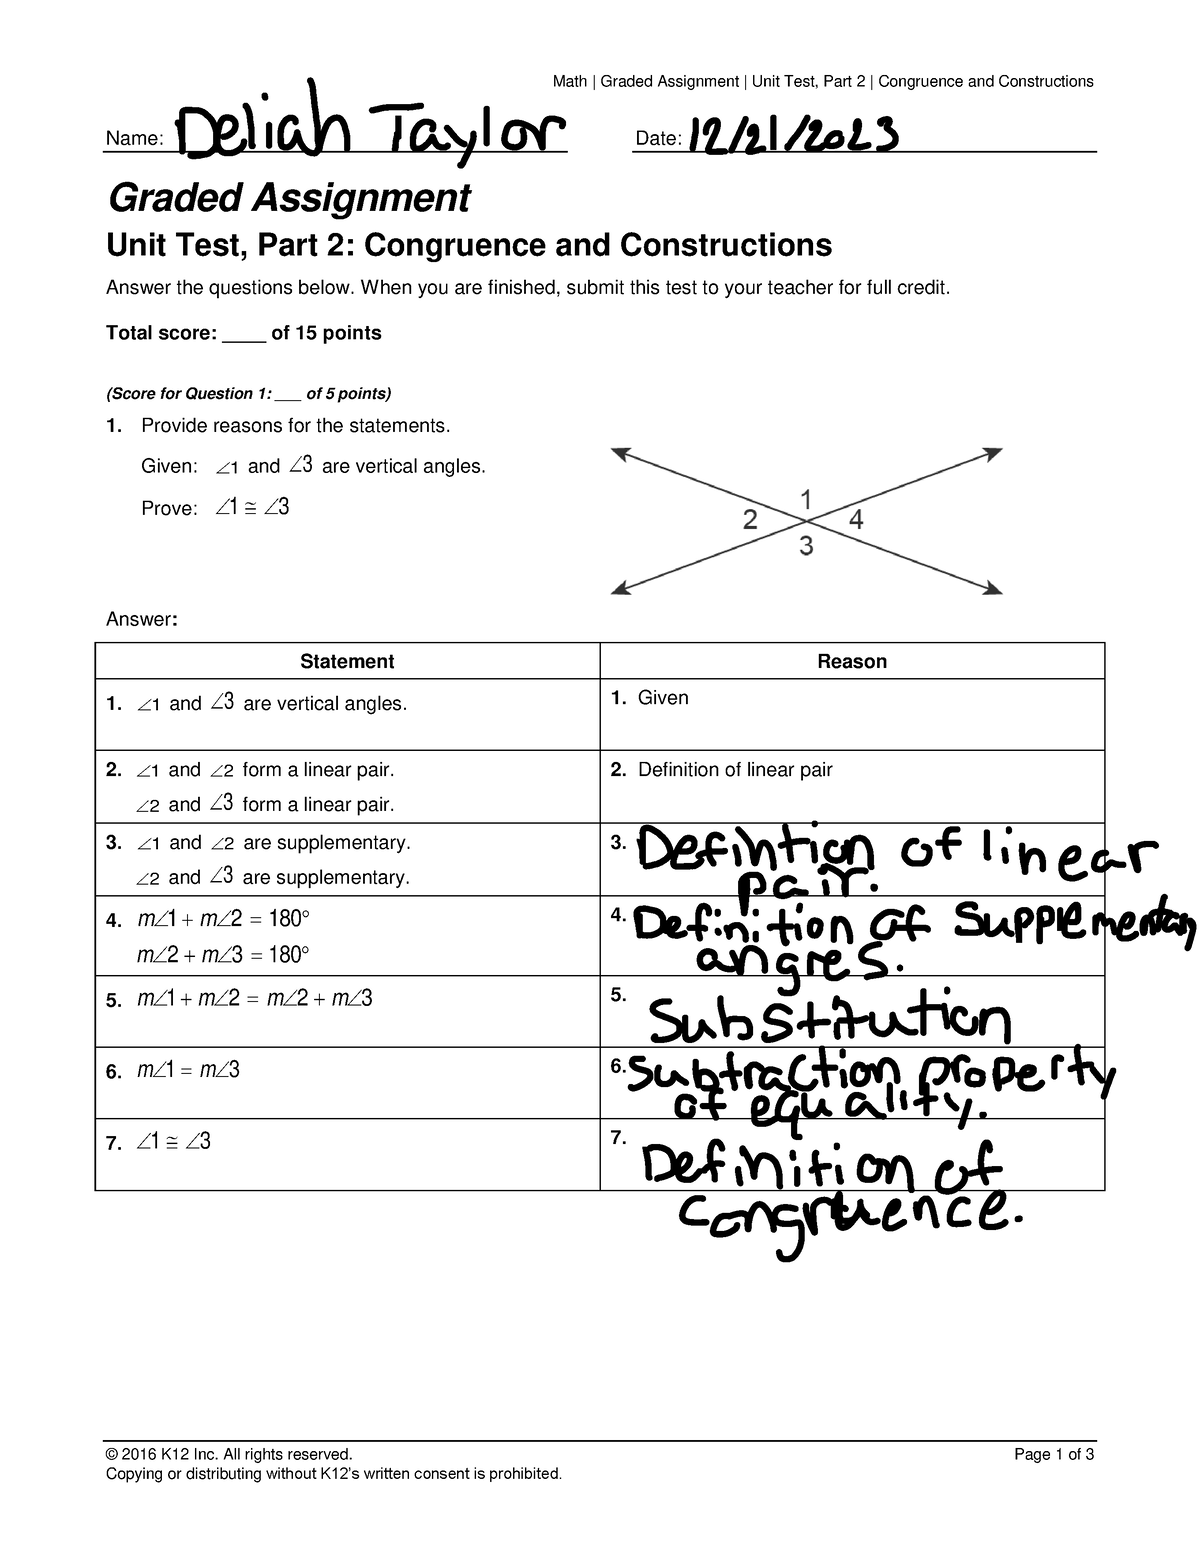 graded assignment unit test part 2 congruence and constructions